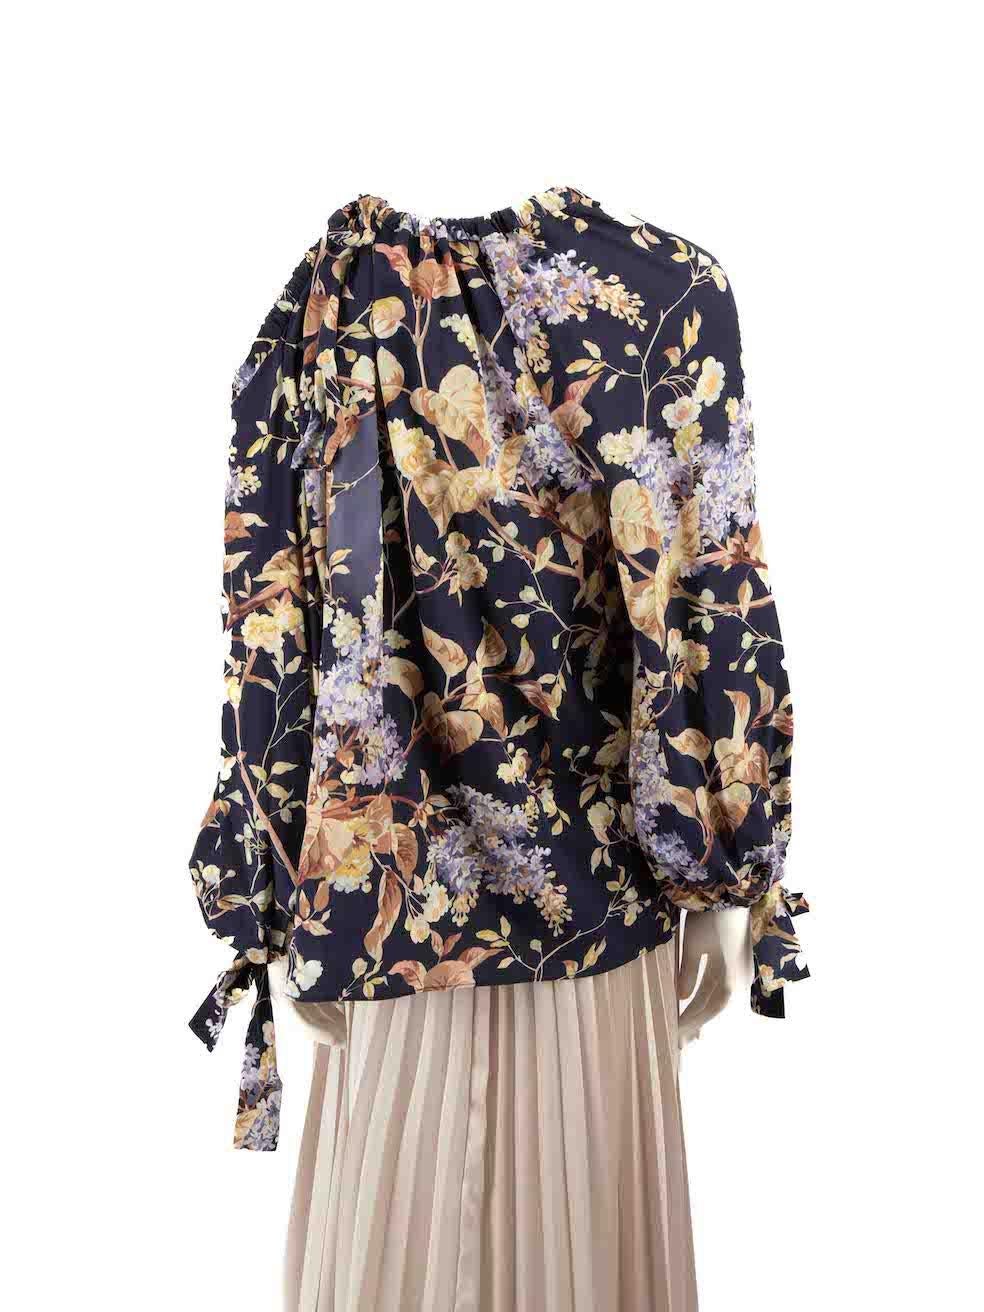 Zimmermann Floral Print Drape Blouse Size XL In Excellent Condition For Sale In London, GB